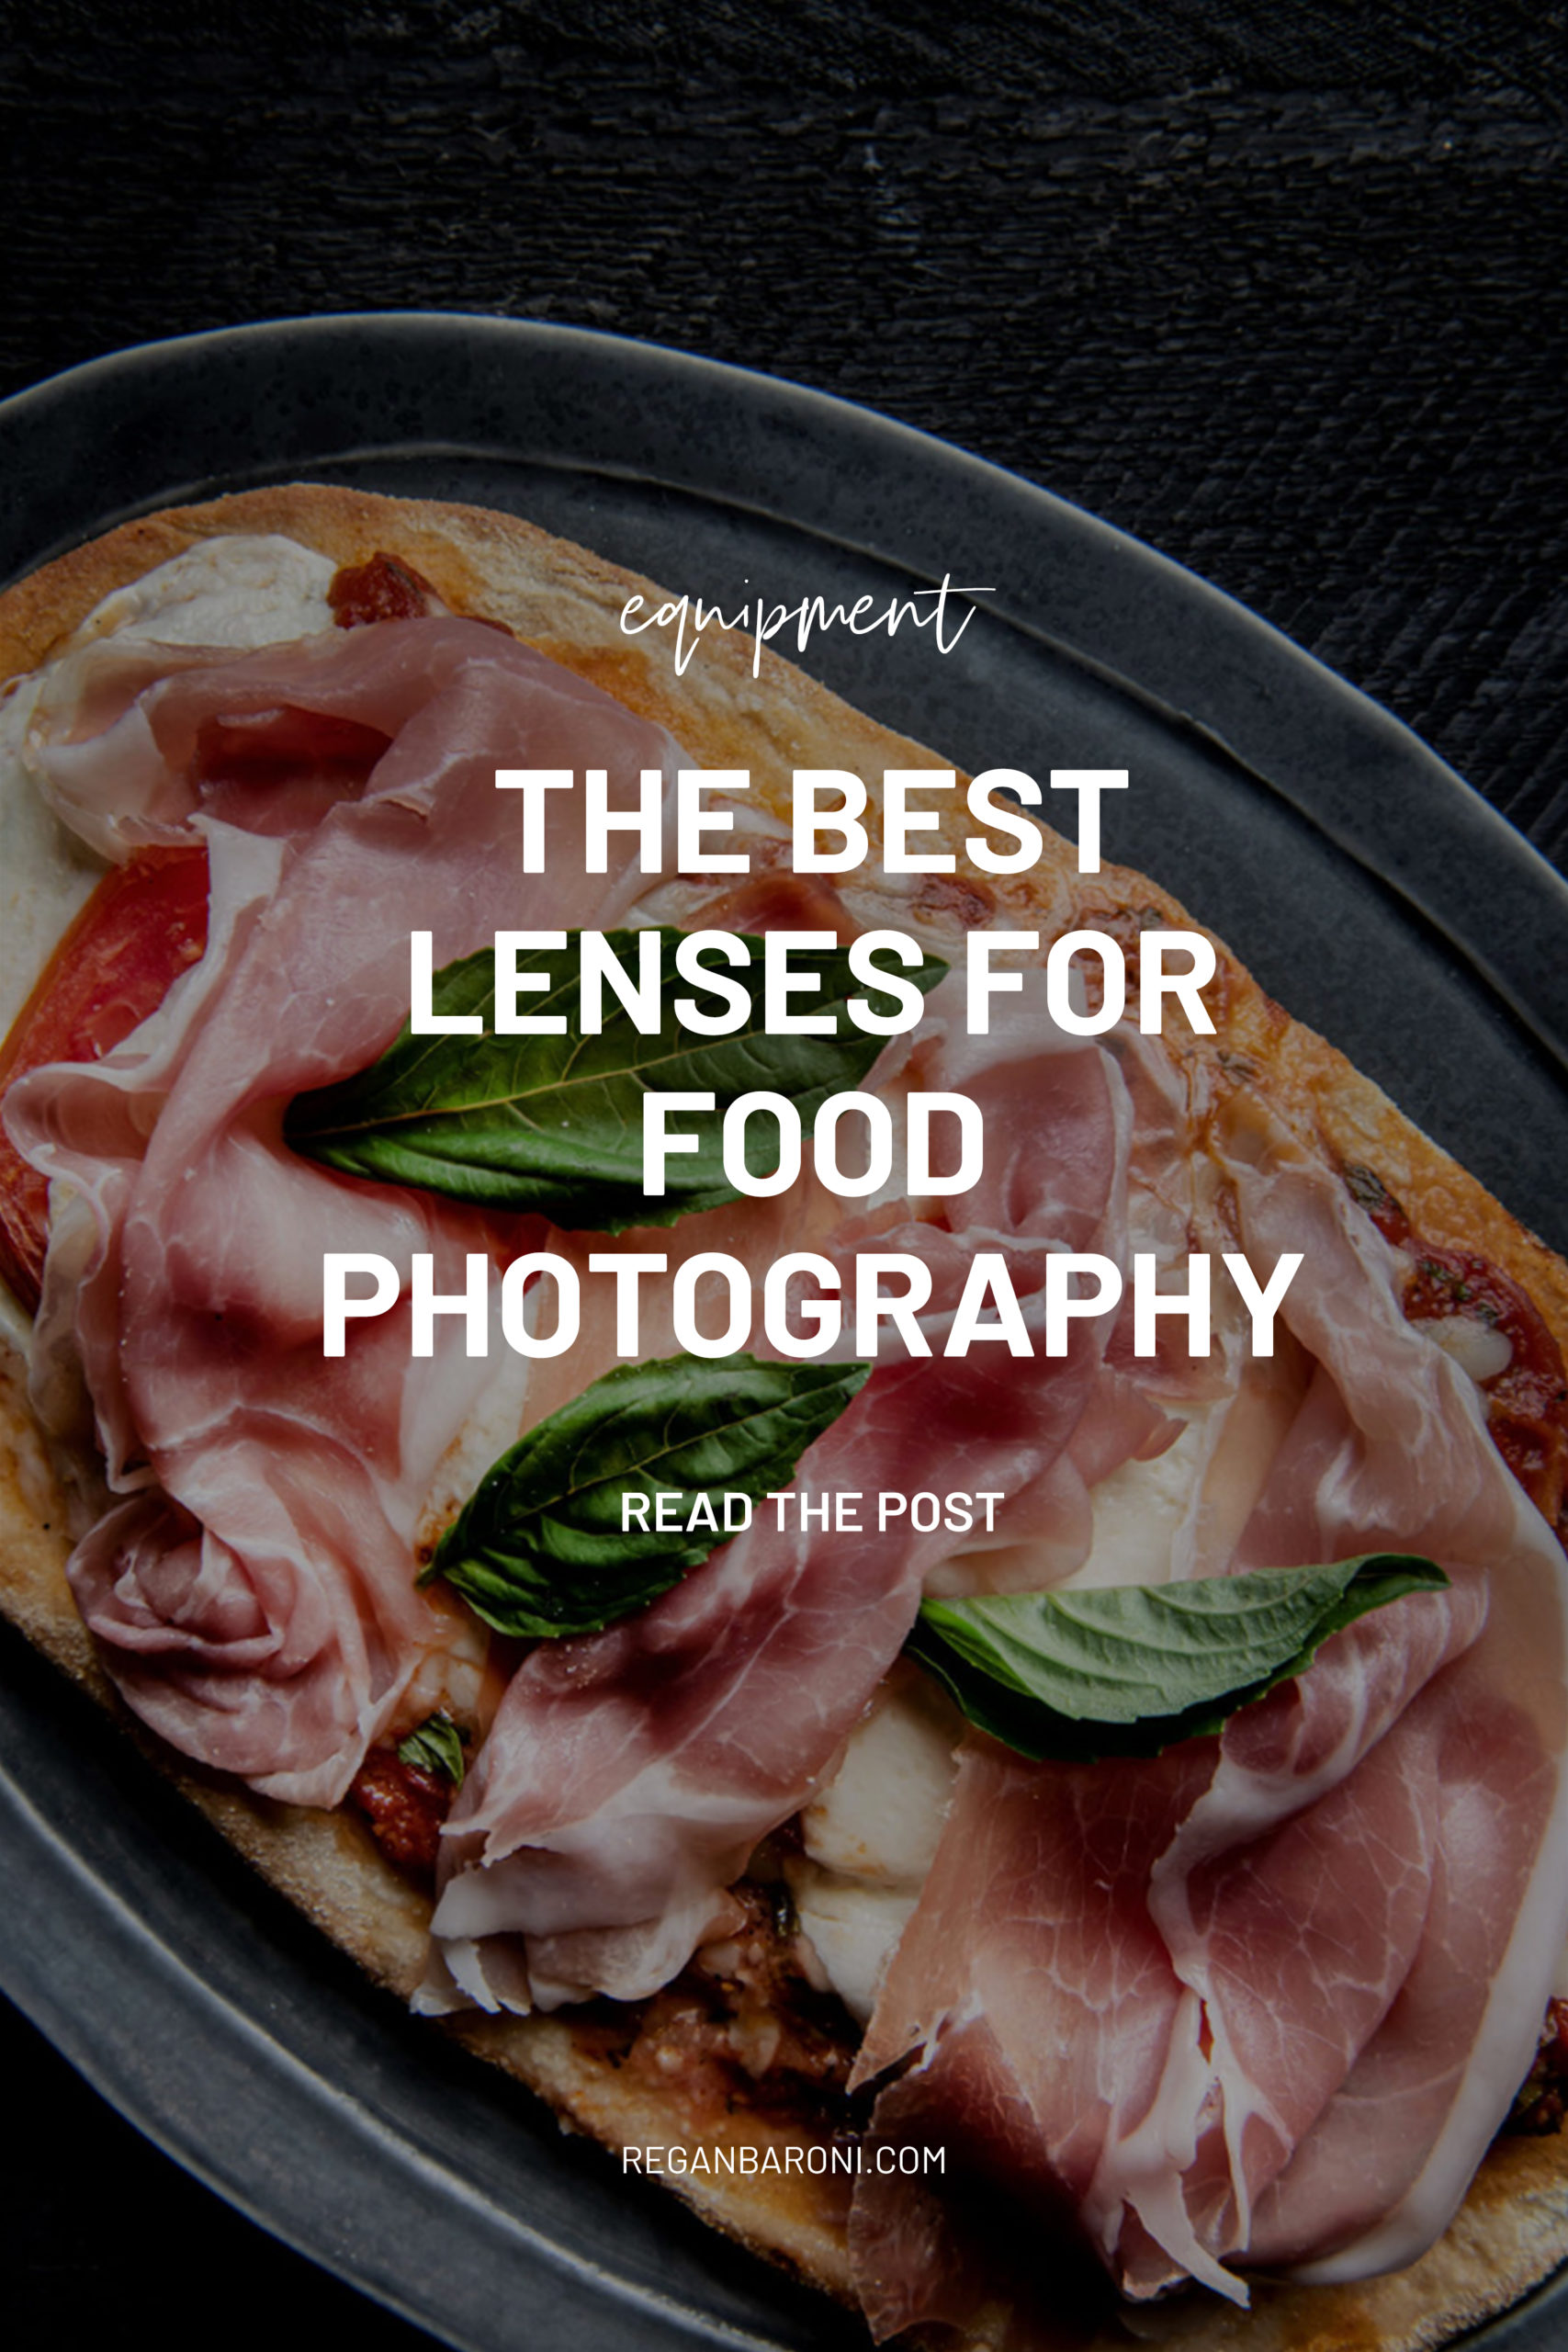 Lenses for Food Photography